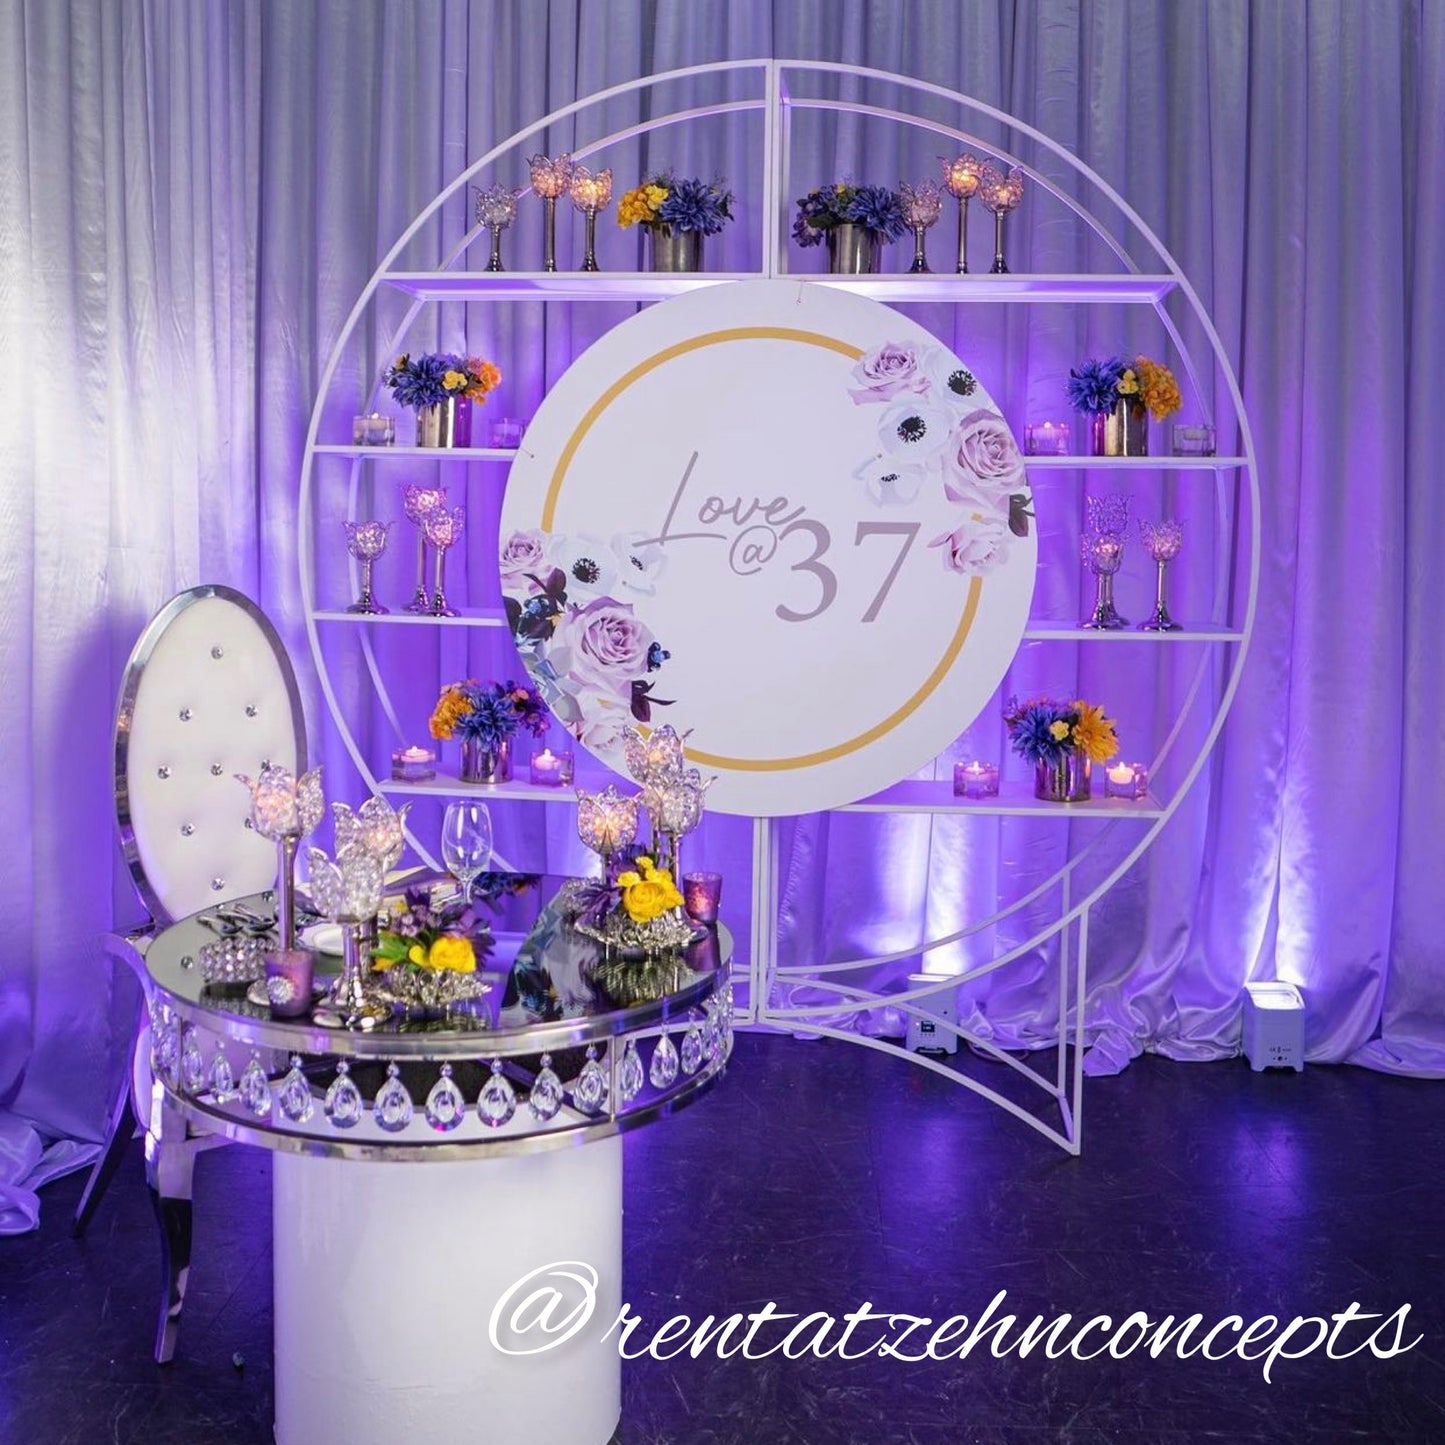 4D circular backdrop or champagne or dessert stand